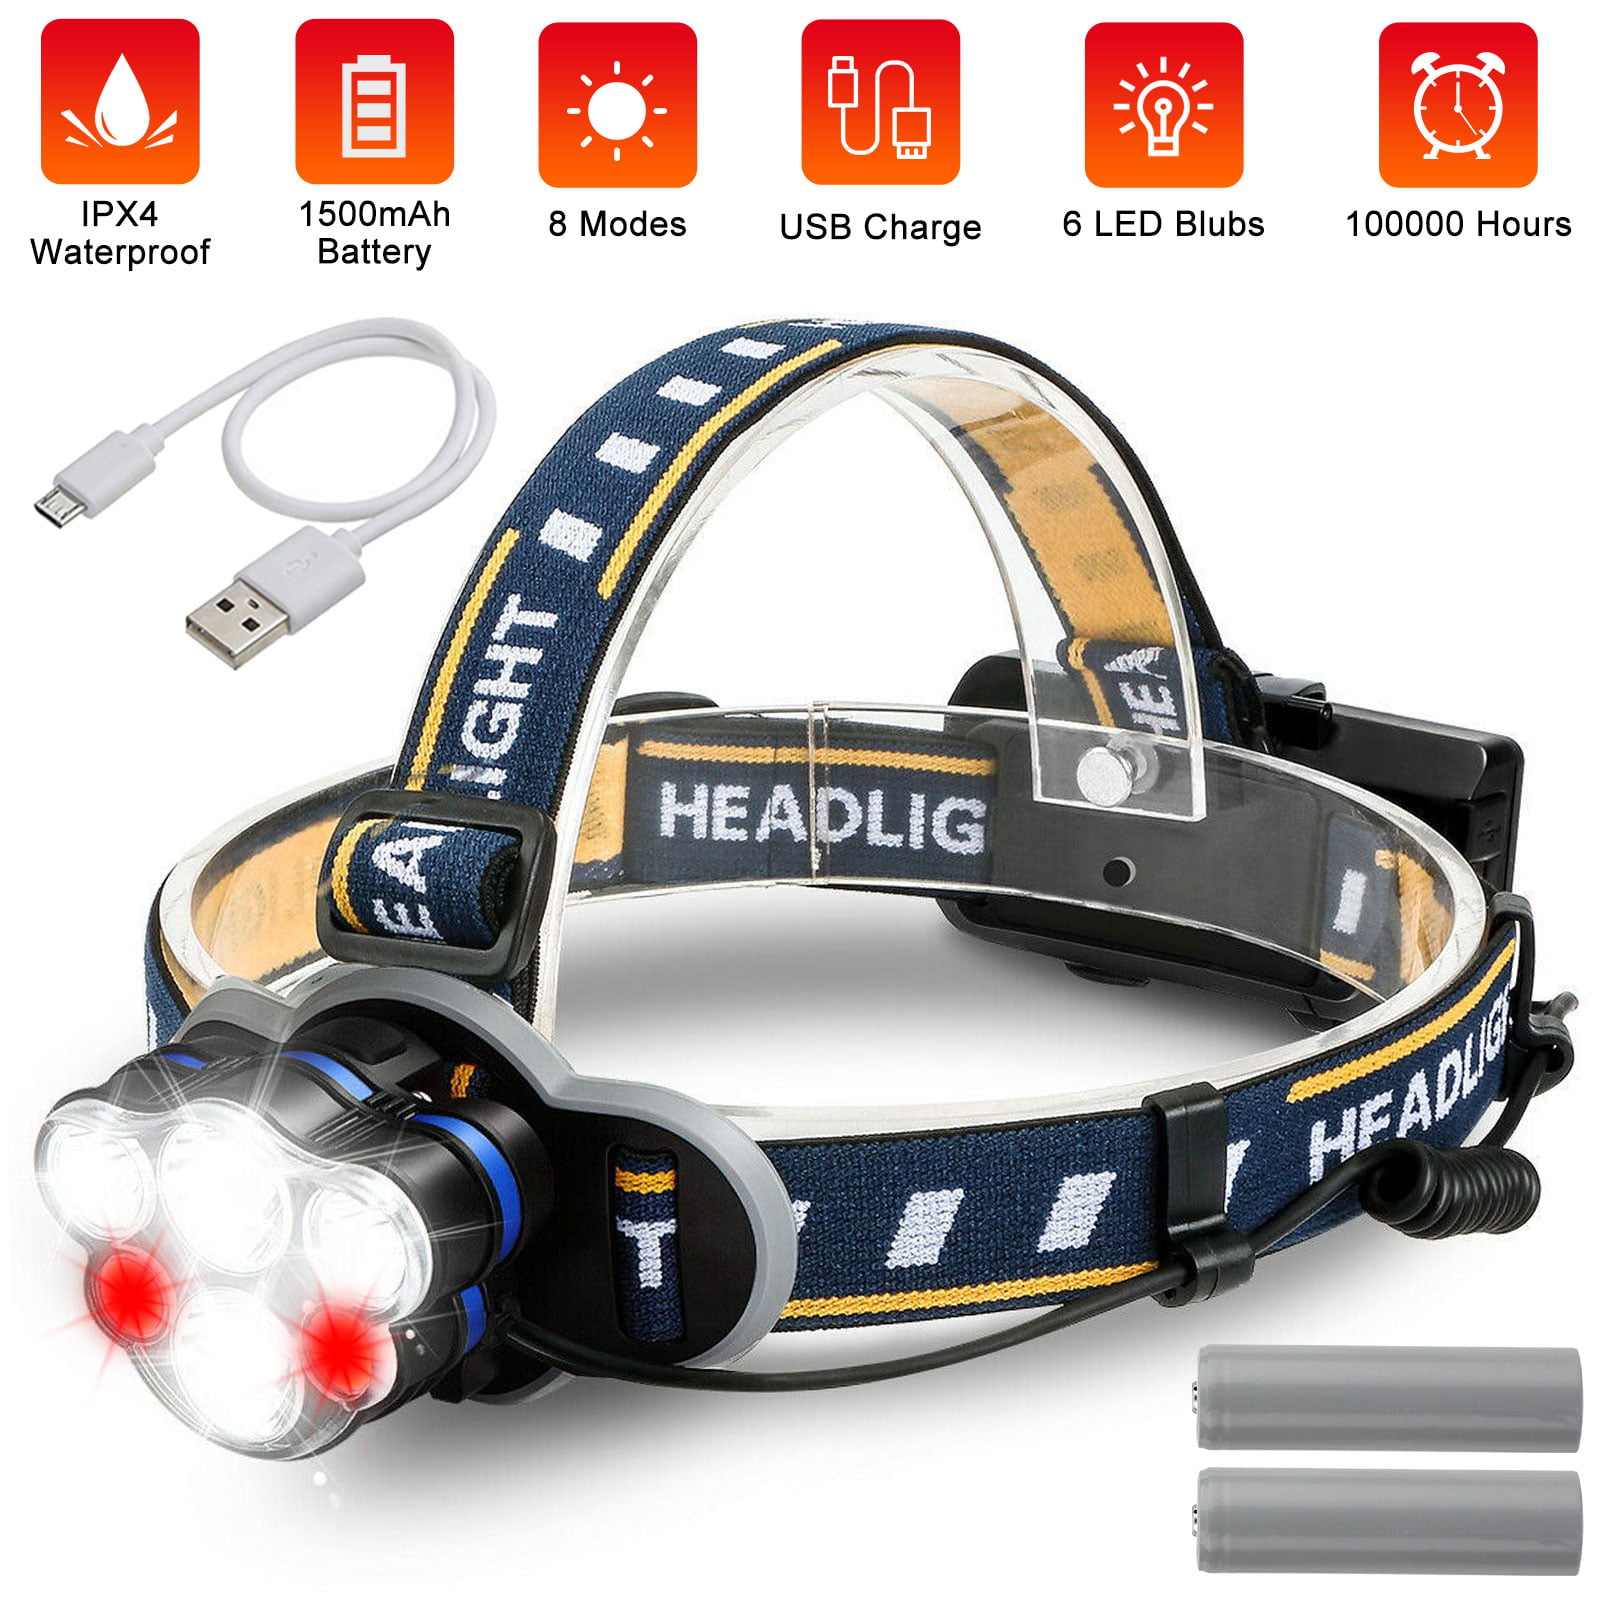 LED Headlights Head Lamp Torch Light Emergency With Headband Camping Survival 